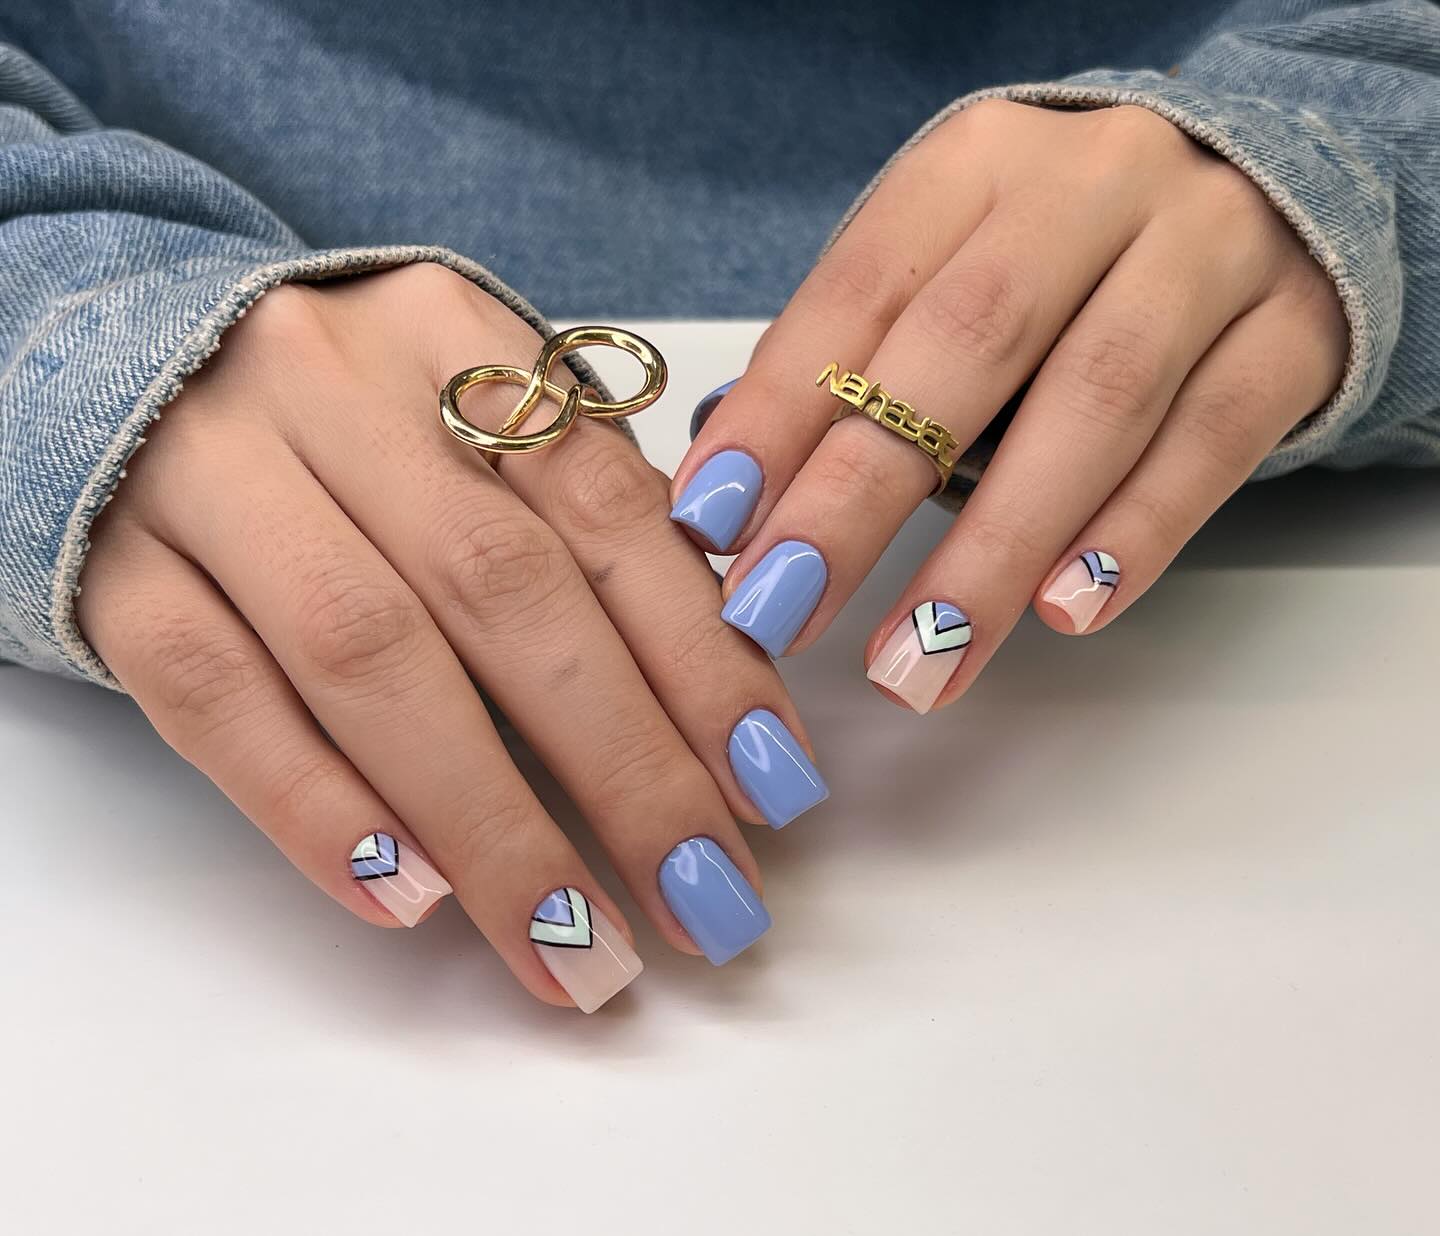 Chic Geometric Pastel Nails with Modern Square Tips